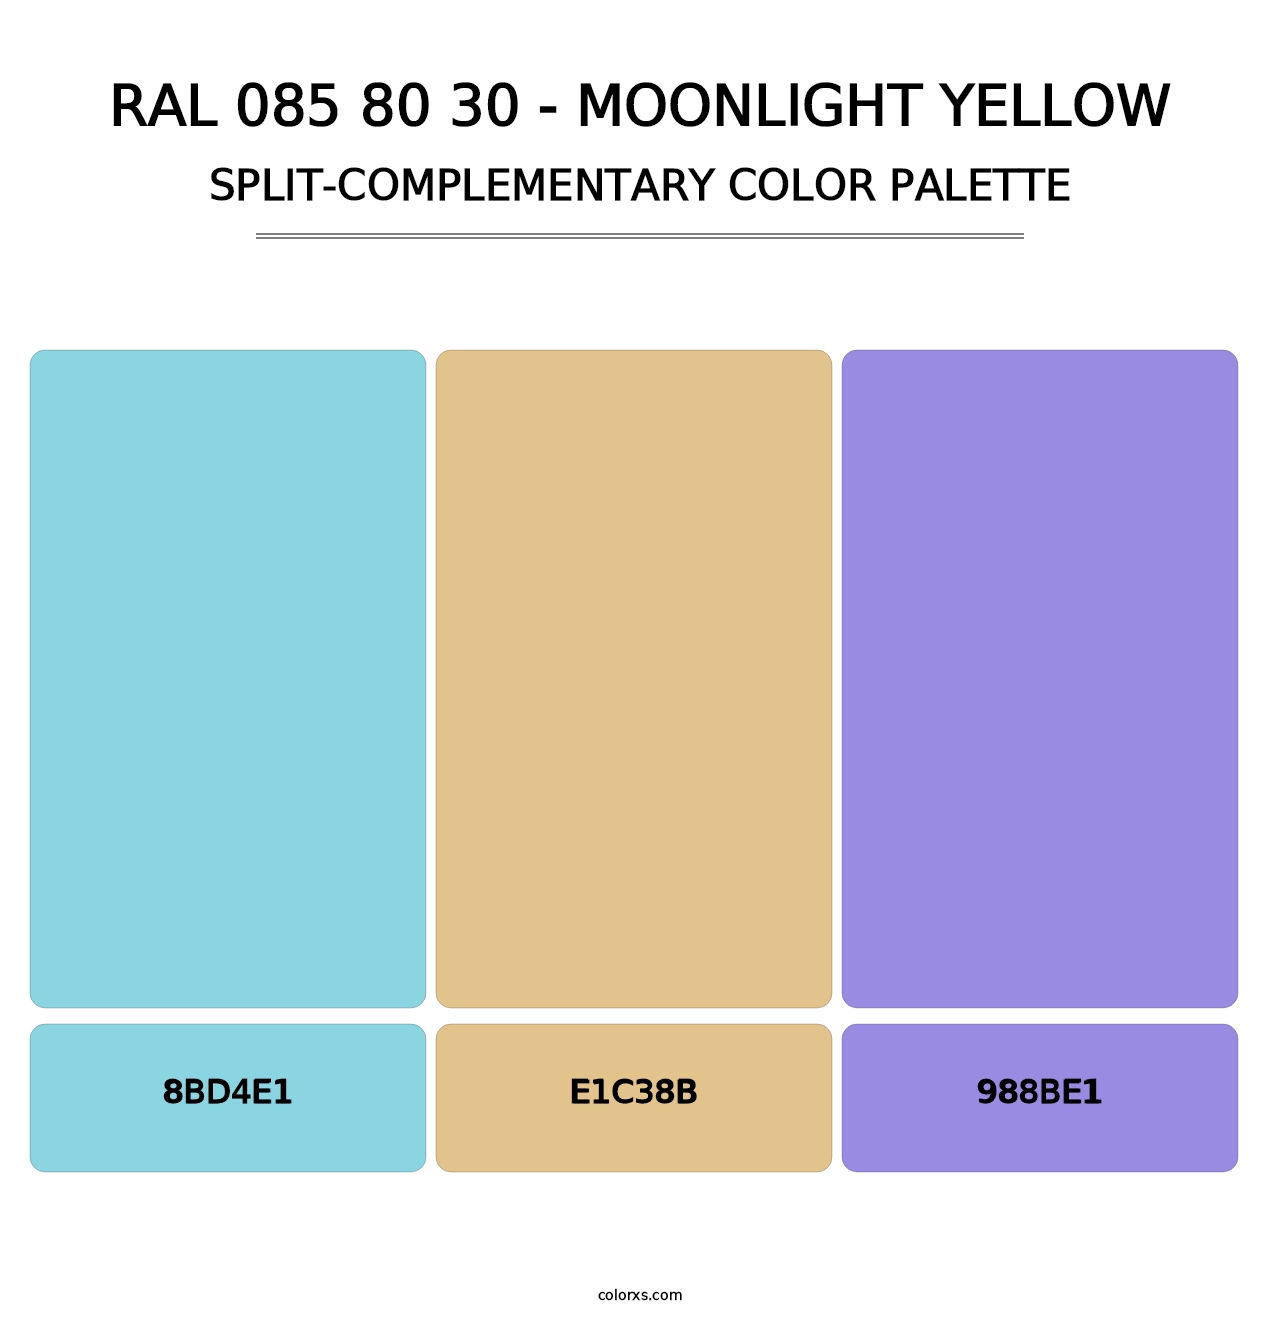 RAL 085 80 30 - Moonlight Yellow - Split-Complementary Color Palette